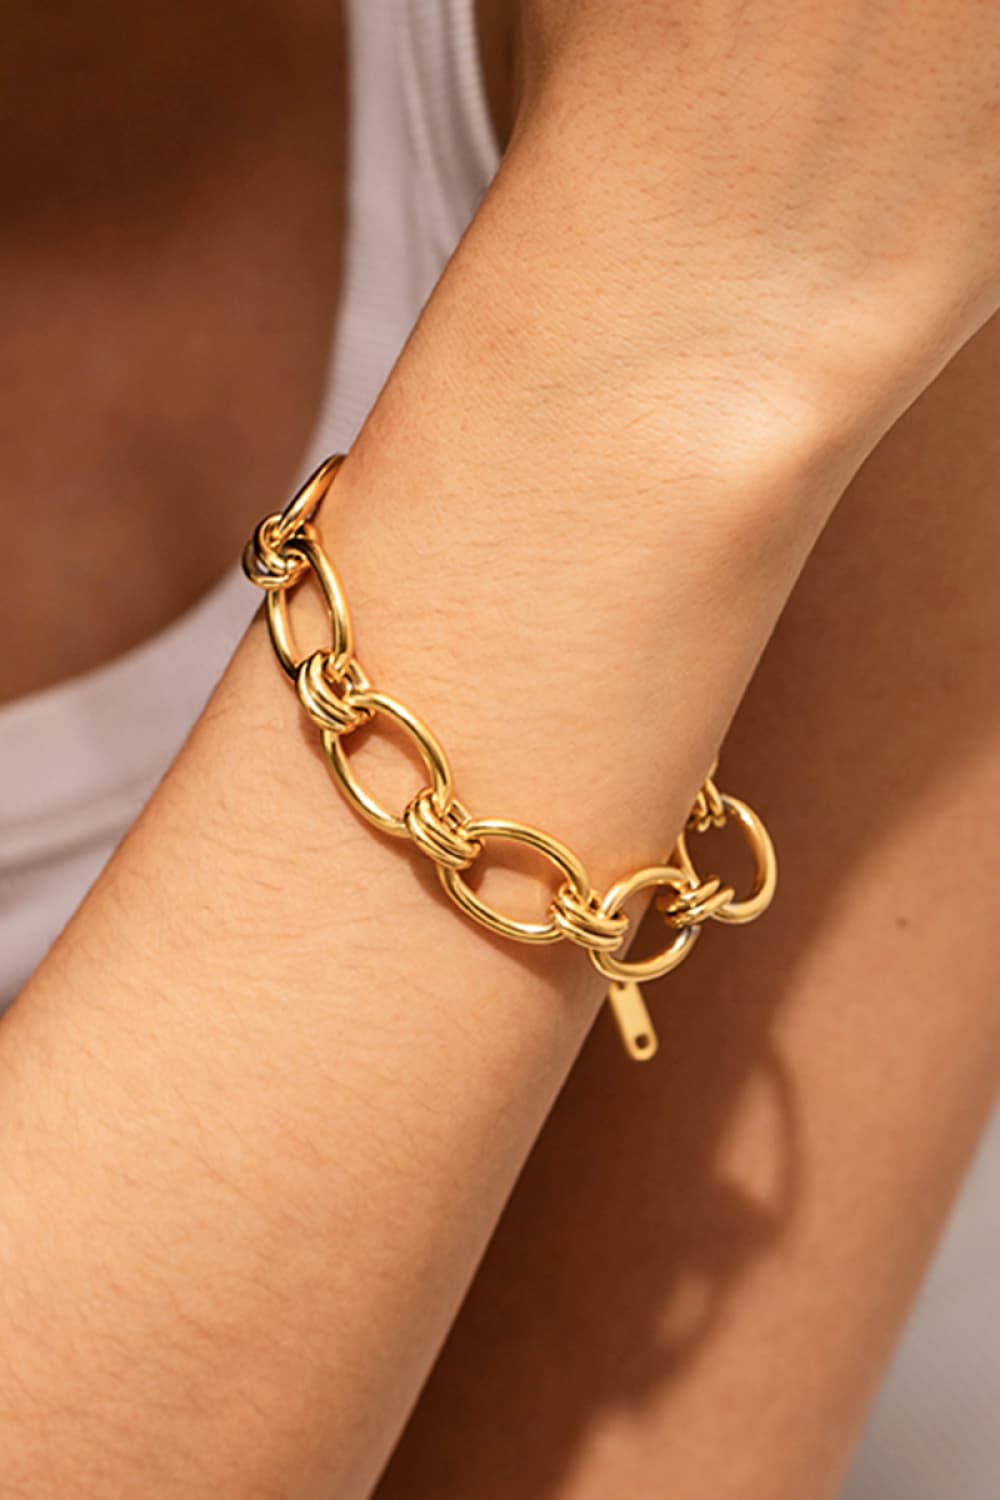 Chunky Chain Stainless Steel Bracelet - Gold / One Size - T-Shirts - Bracelets - 1 - 2024